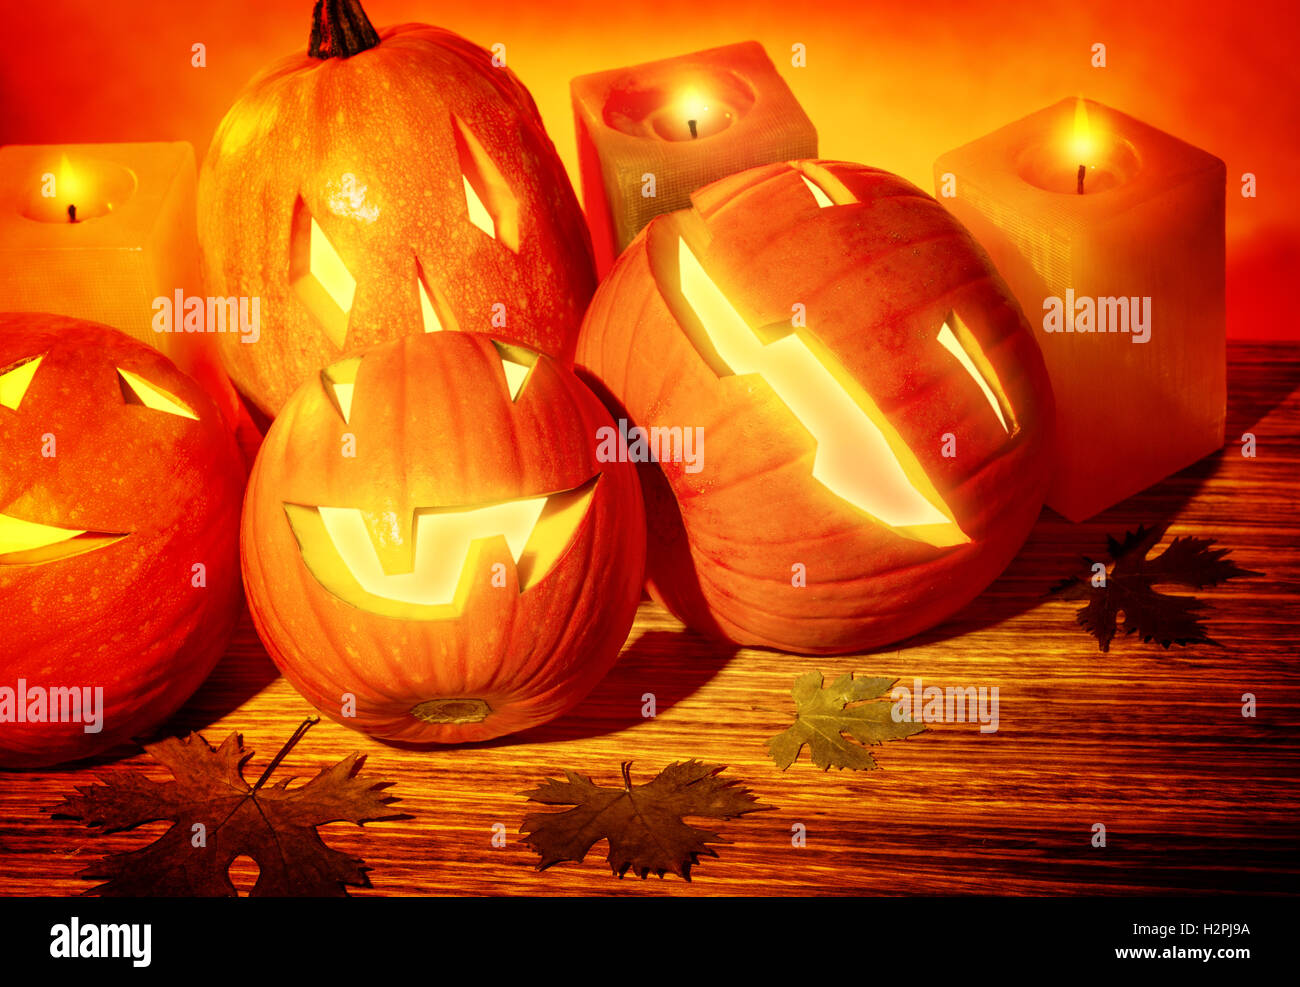 Closeup photo of a carved pumpkins with scary faces and glowing candles on the table, festive party decoration for Halloween Stock Photo